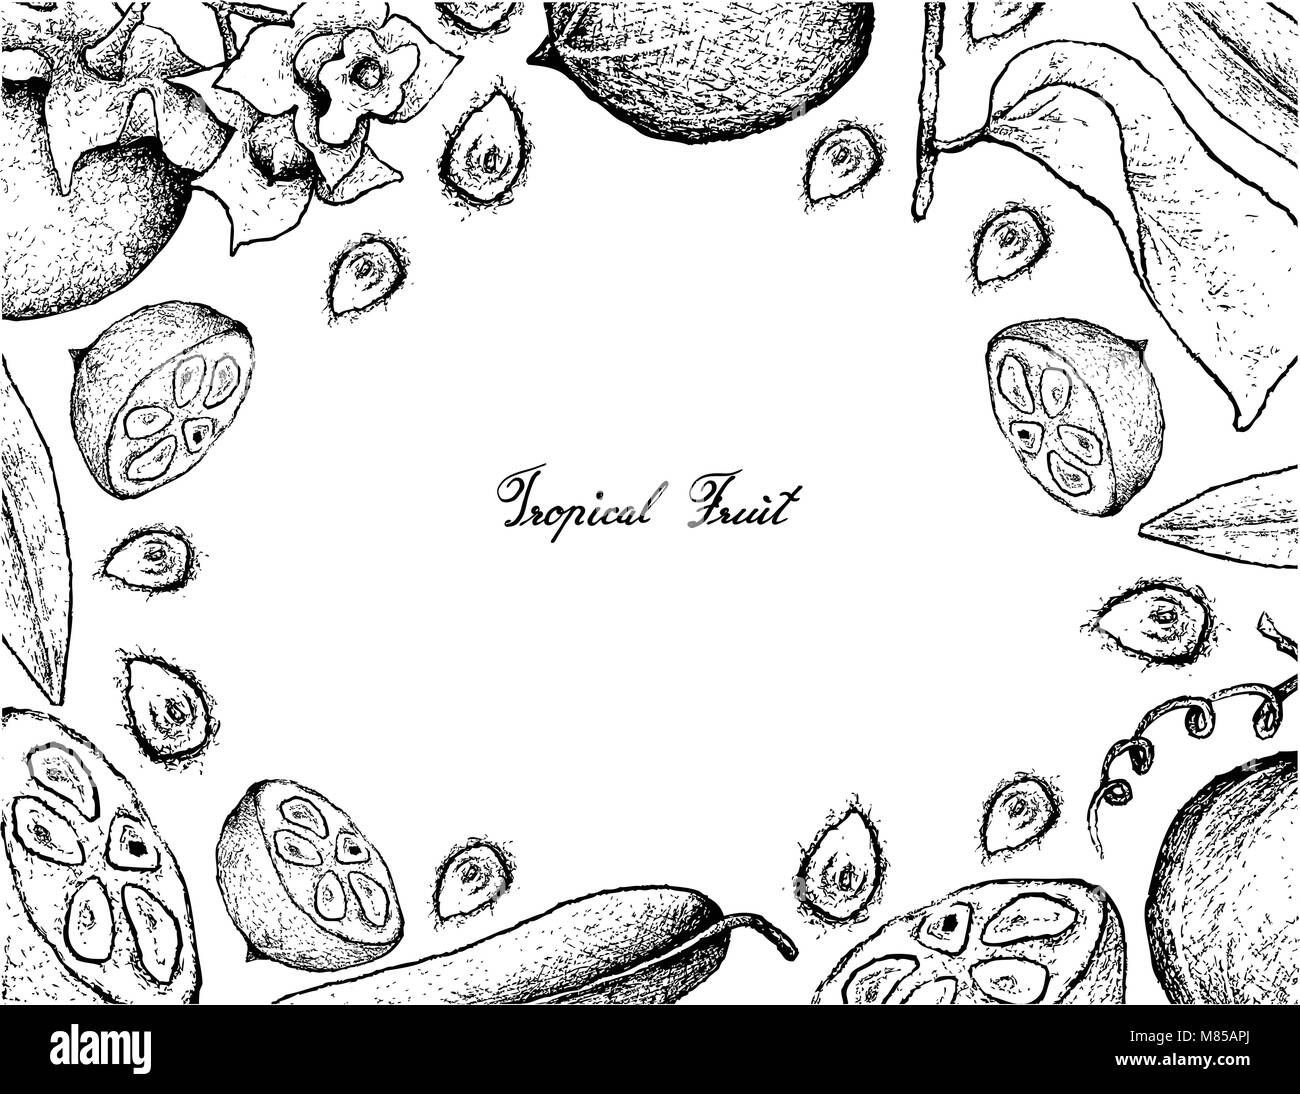 Tropical Fruit, Illustration Frame of Hand Drawn Sketch of Malabar Ebony or Diospyros Malabarica Fruits and Monk Fruit, Luo Han Guo or Siraitia Grosve Stock Vector